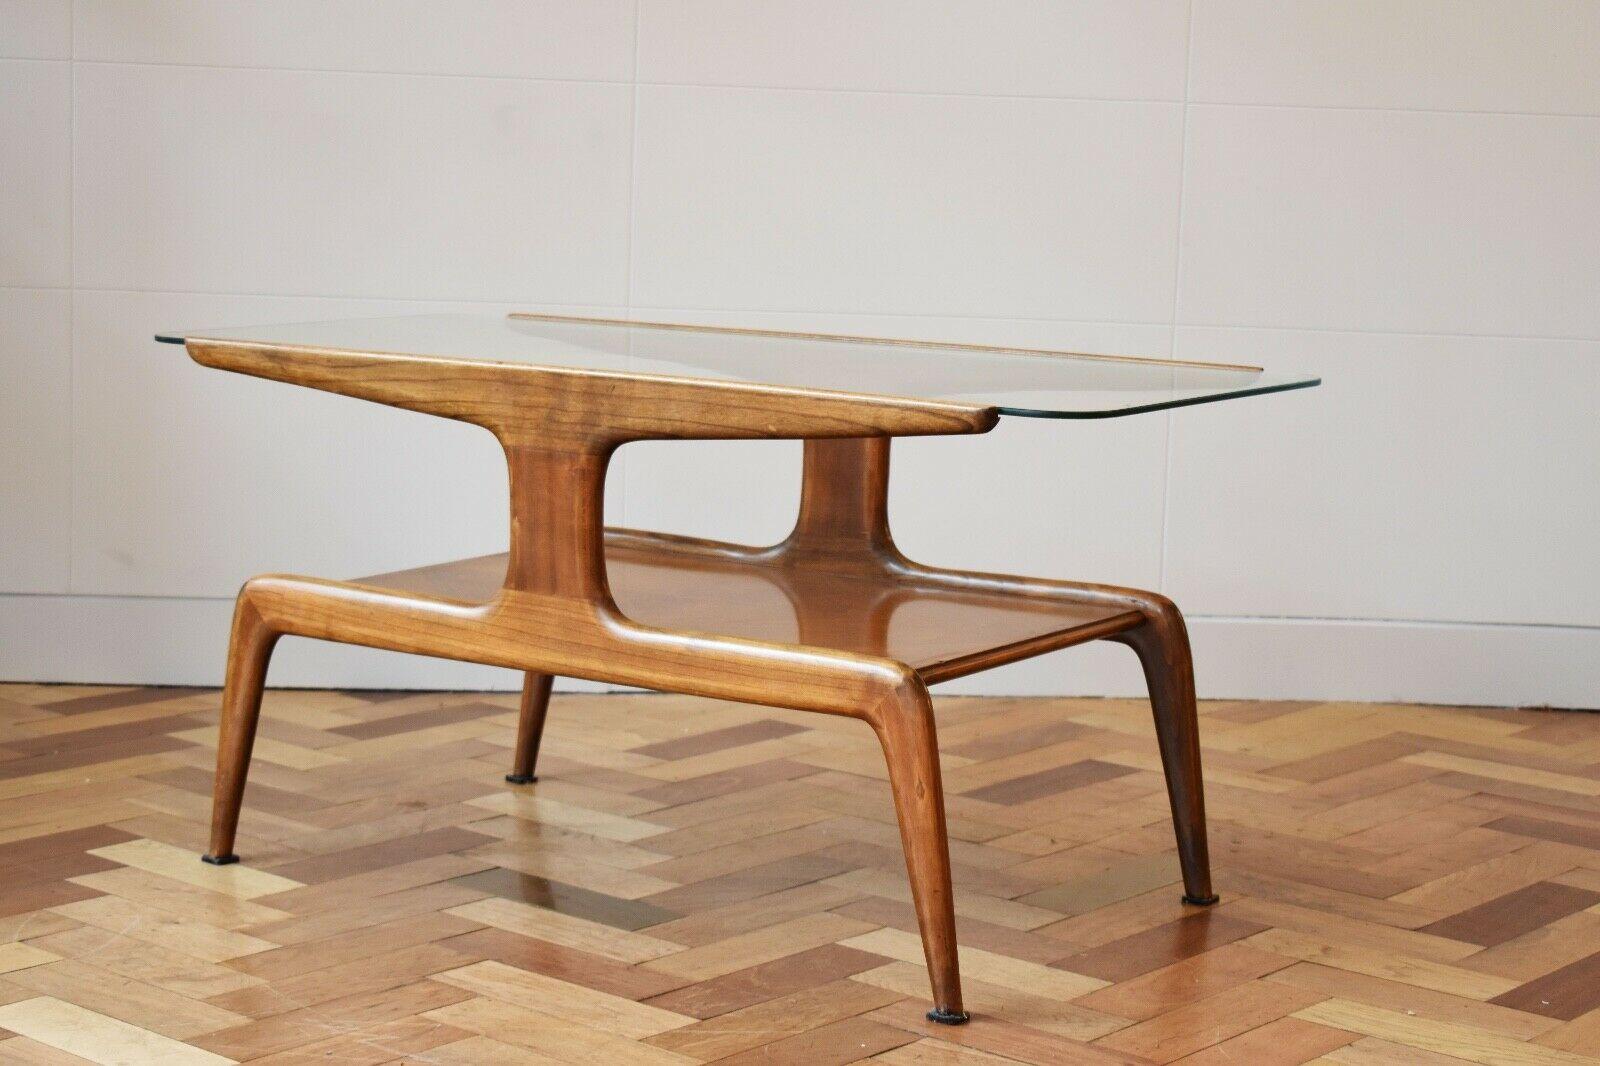 Very rare sculptural Domus Nova coffee table designed by Gio Ponti and manufactured by Domus Nova for the store ‘La Rinascente’, Italy 1950.
This table is made of walnut wood and gas a glass top. There is a pattern on the lower part of the table,